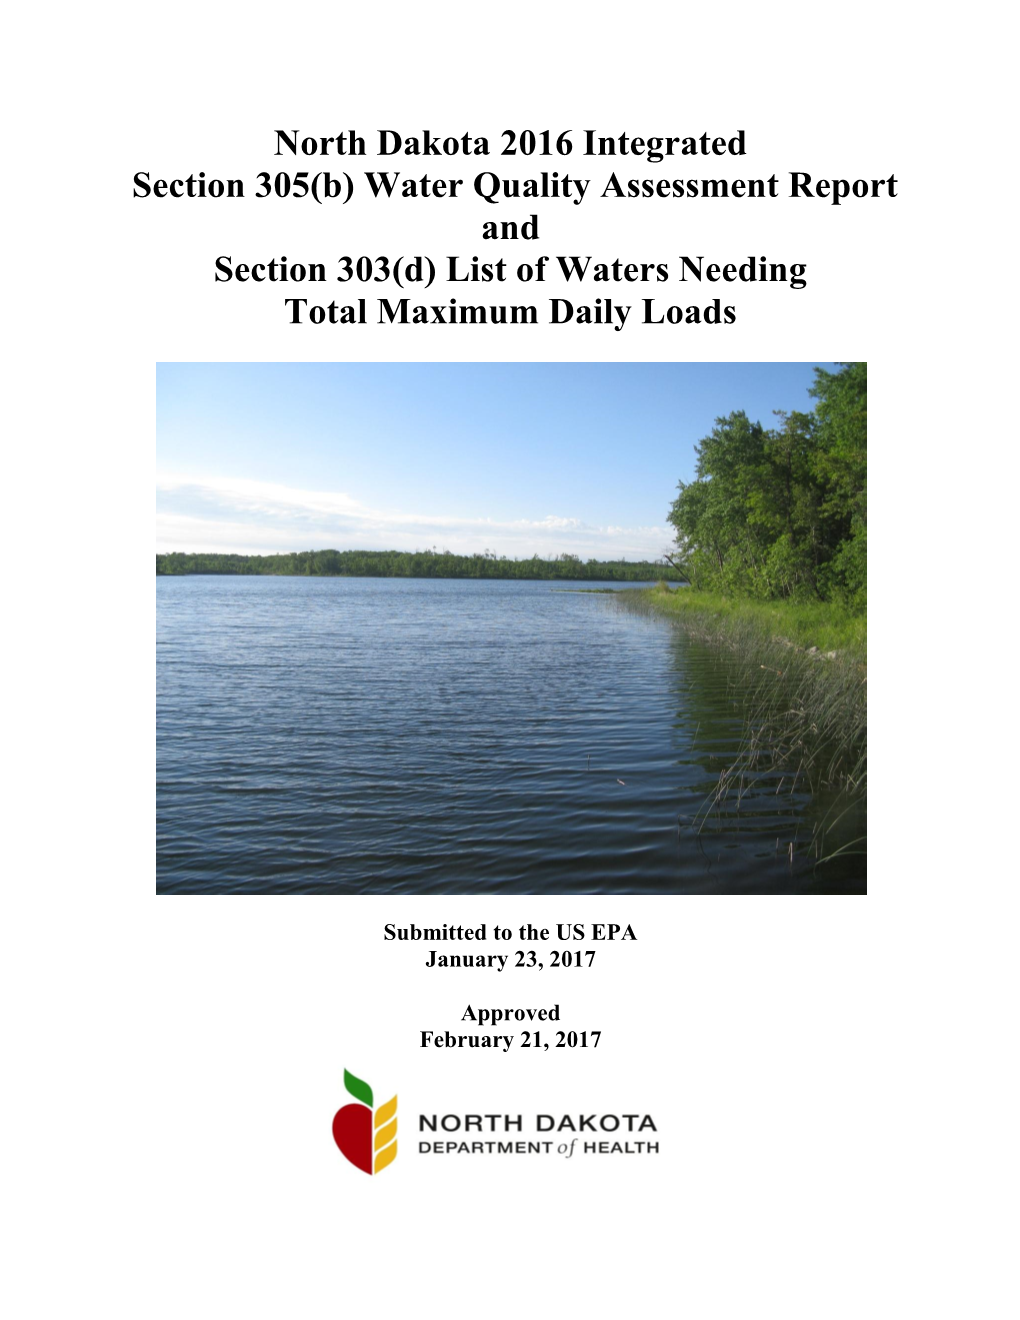 North Dakota 2016 Integrated Section 305(B) Water Quality Assessment Report and Section 303(D) List of Waters Needing Total Maximum Daily Loads